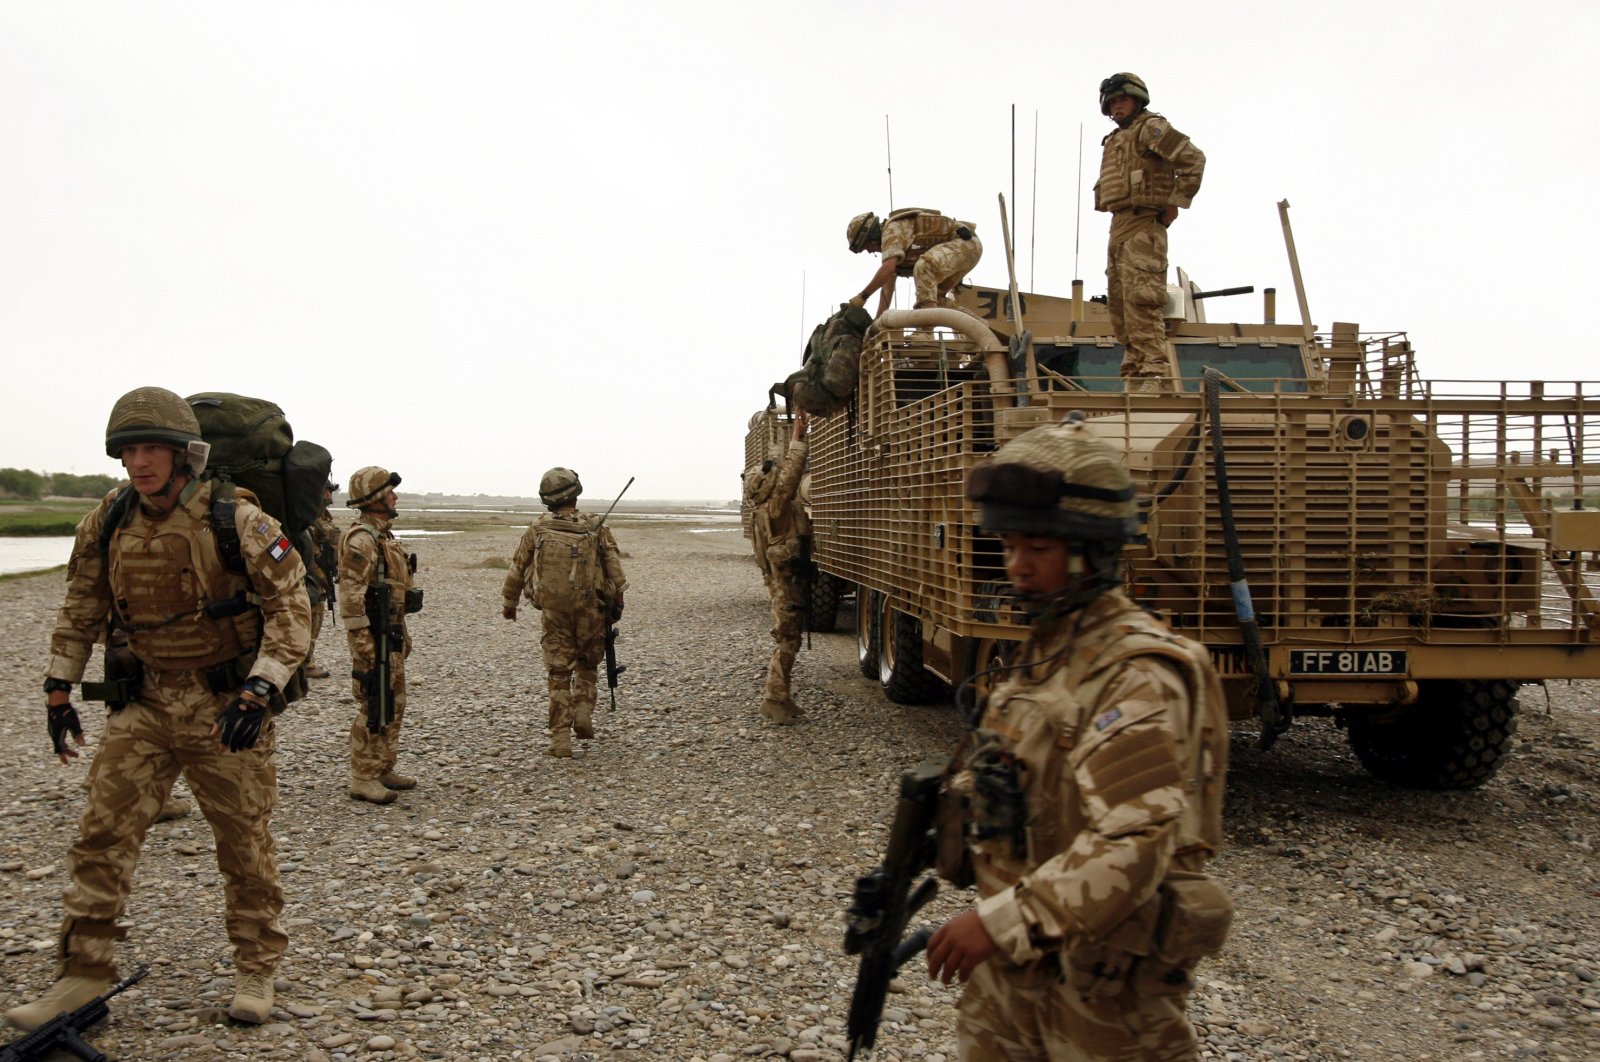 British soldiers patrol in Musa Qala, Helmand province, Afghanistan, March 28,2009. (Afghanistan Military via Reuters)